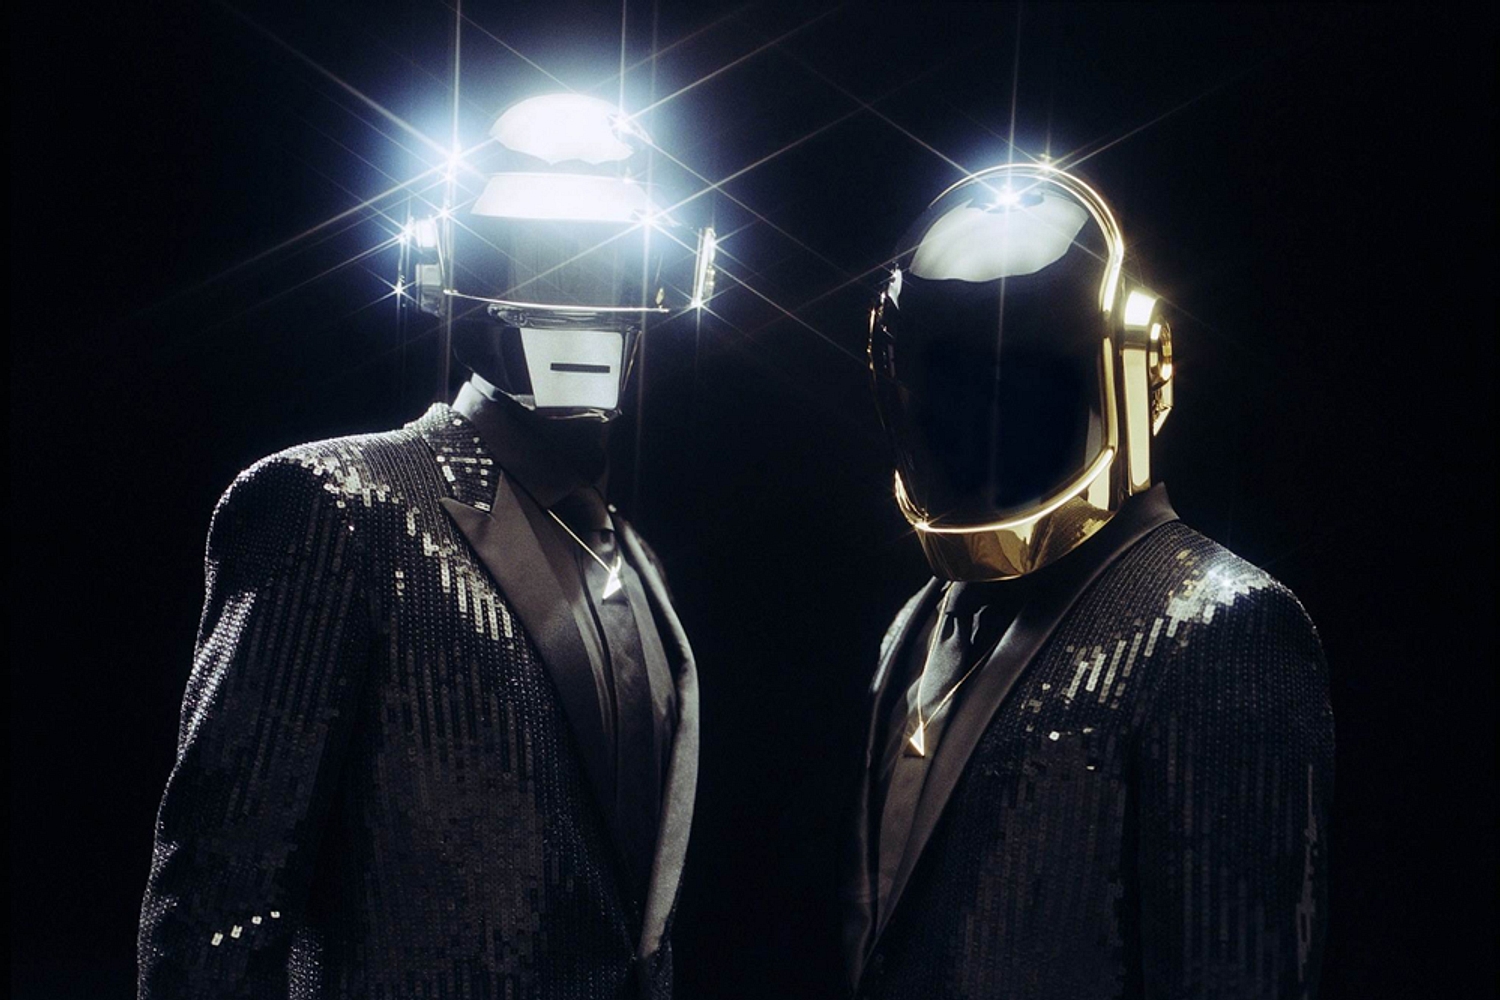 Daft Punk have no touring plans in 2017, apparently